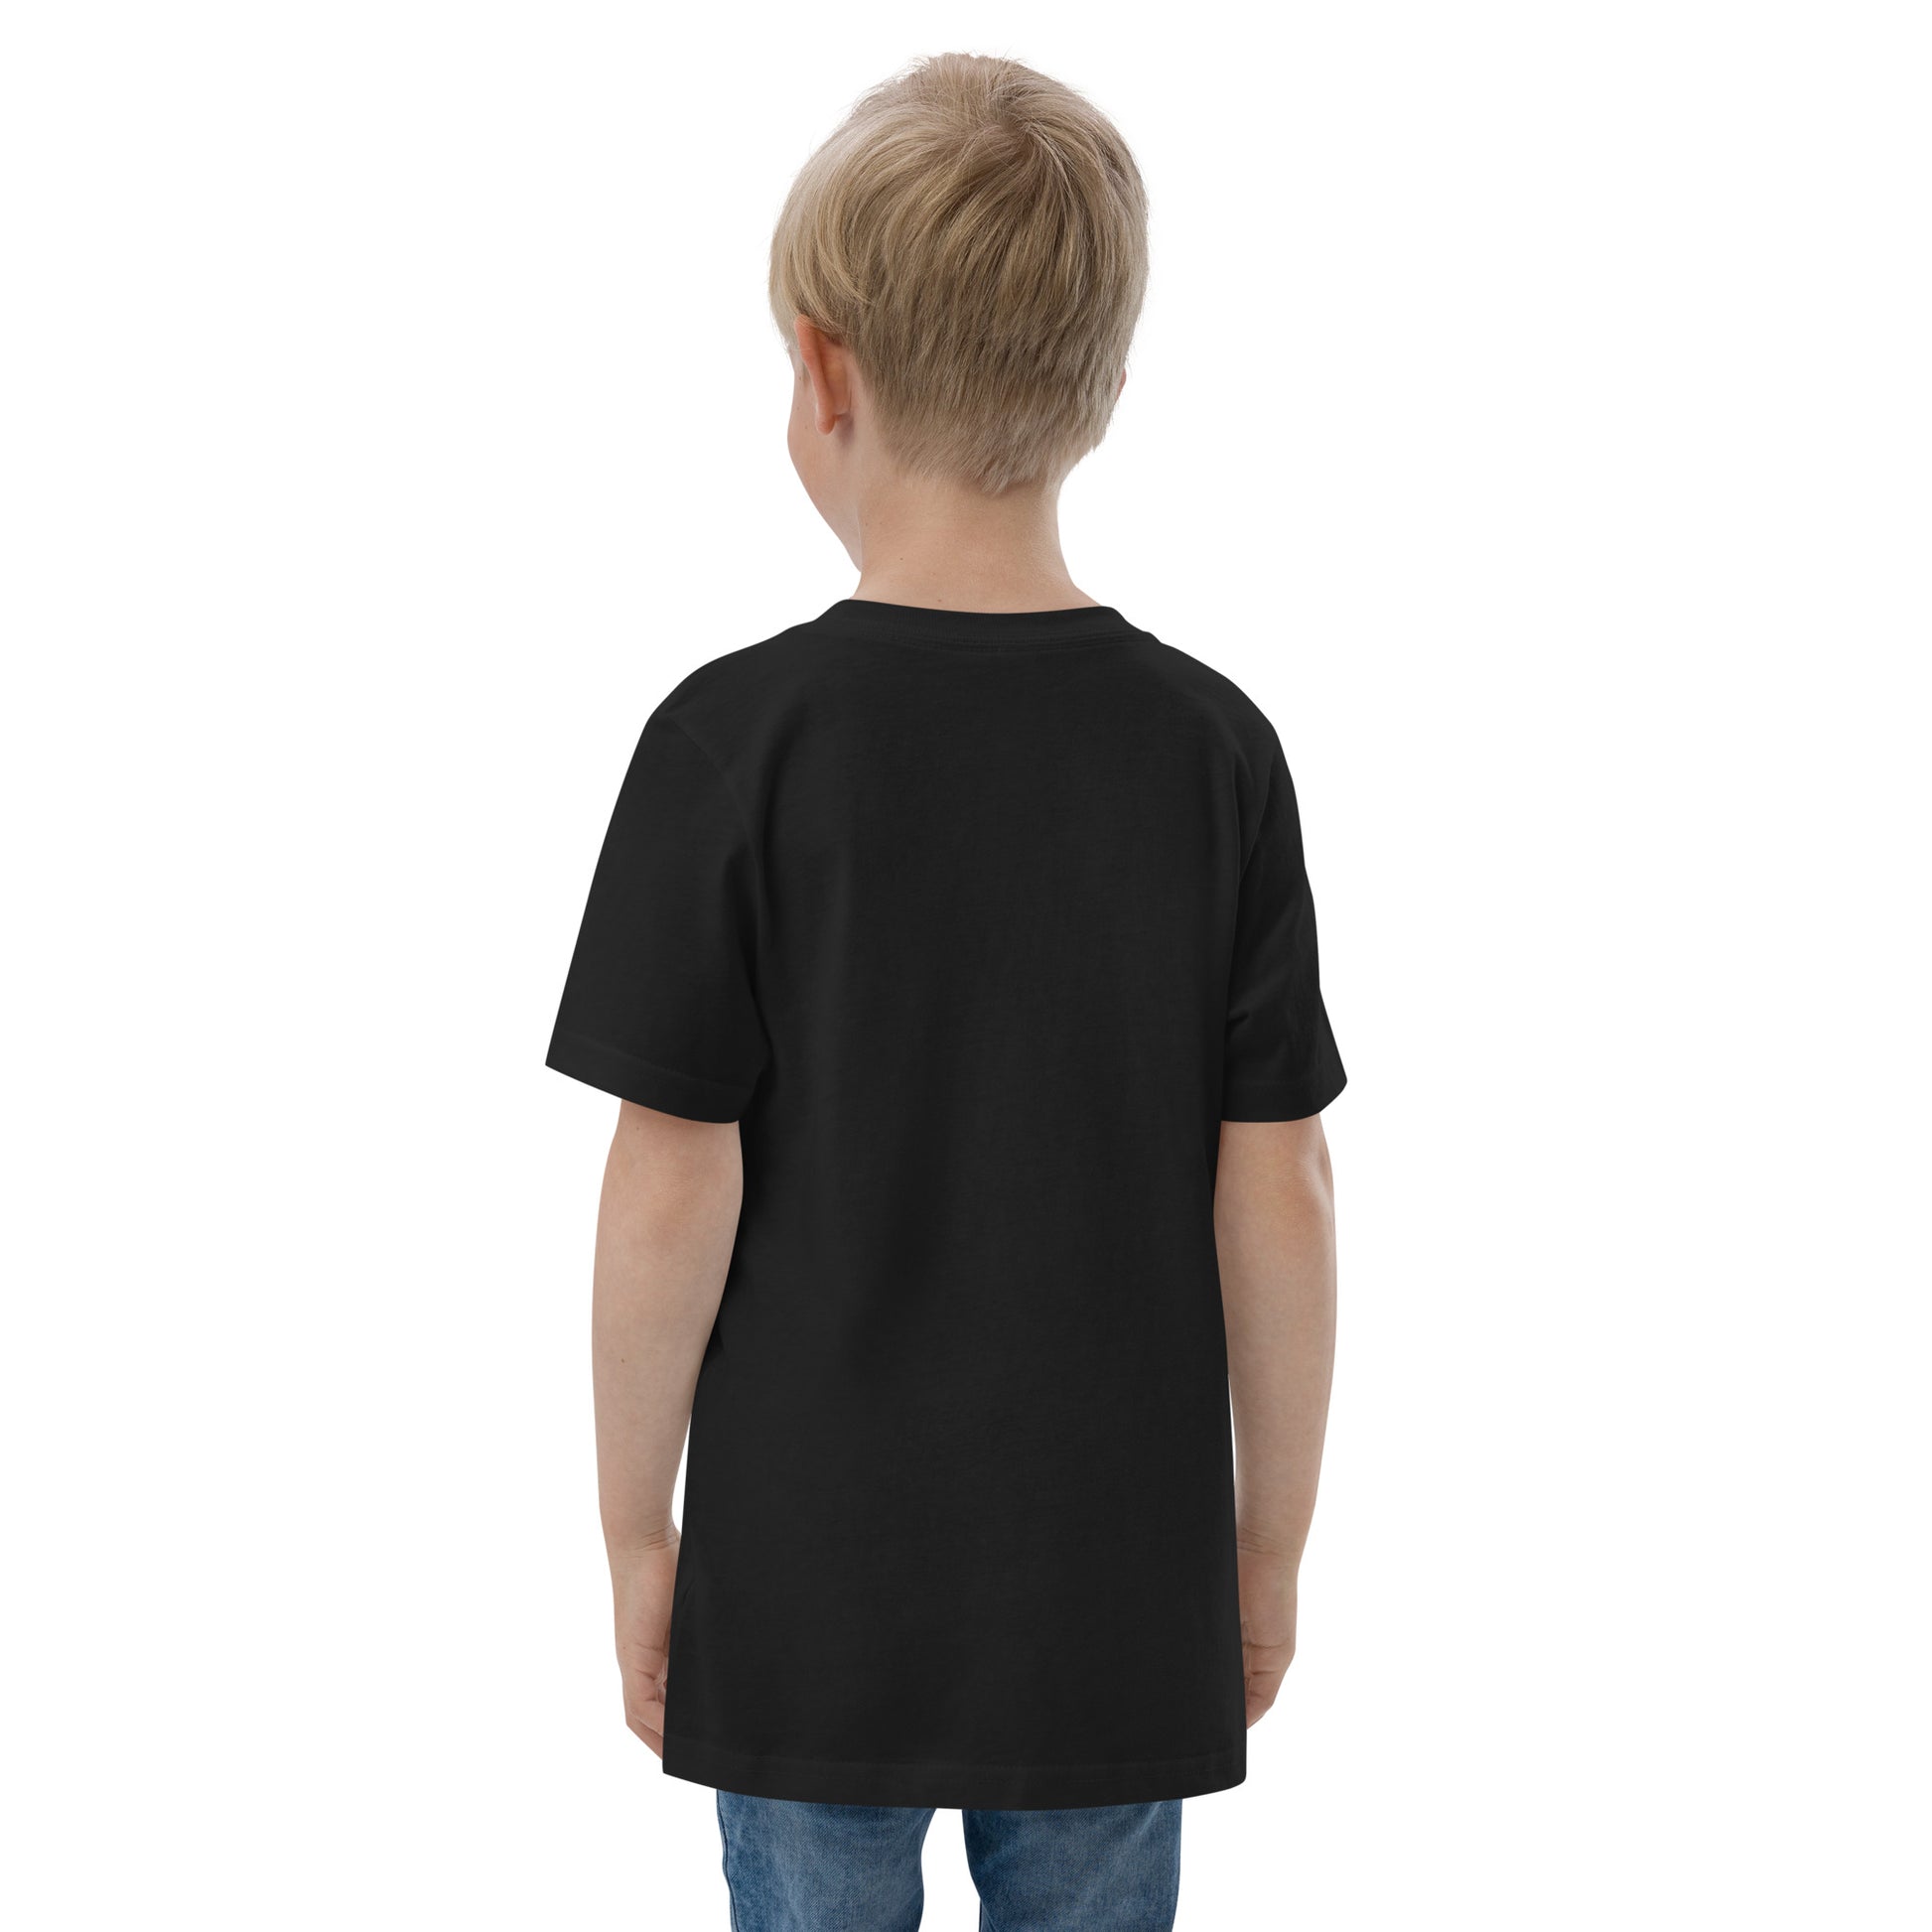  Kids T-Shirt - Black  - Back view, being warn on boy standing with his arms by his side - Go Sea Kayak Byron Bay Crew (issue 2018-2019) logo on front - Genuine Byron Bay Merchandise | Produced by Go Sea Kayak Byron Bay 